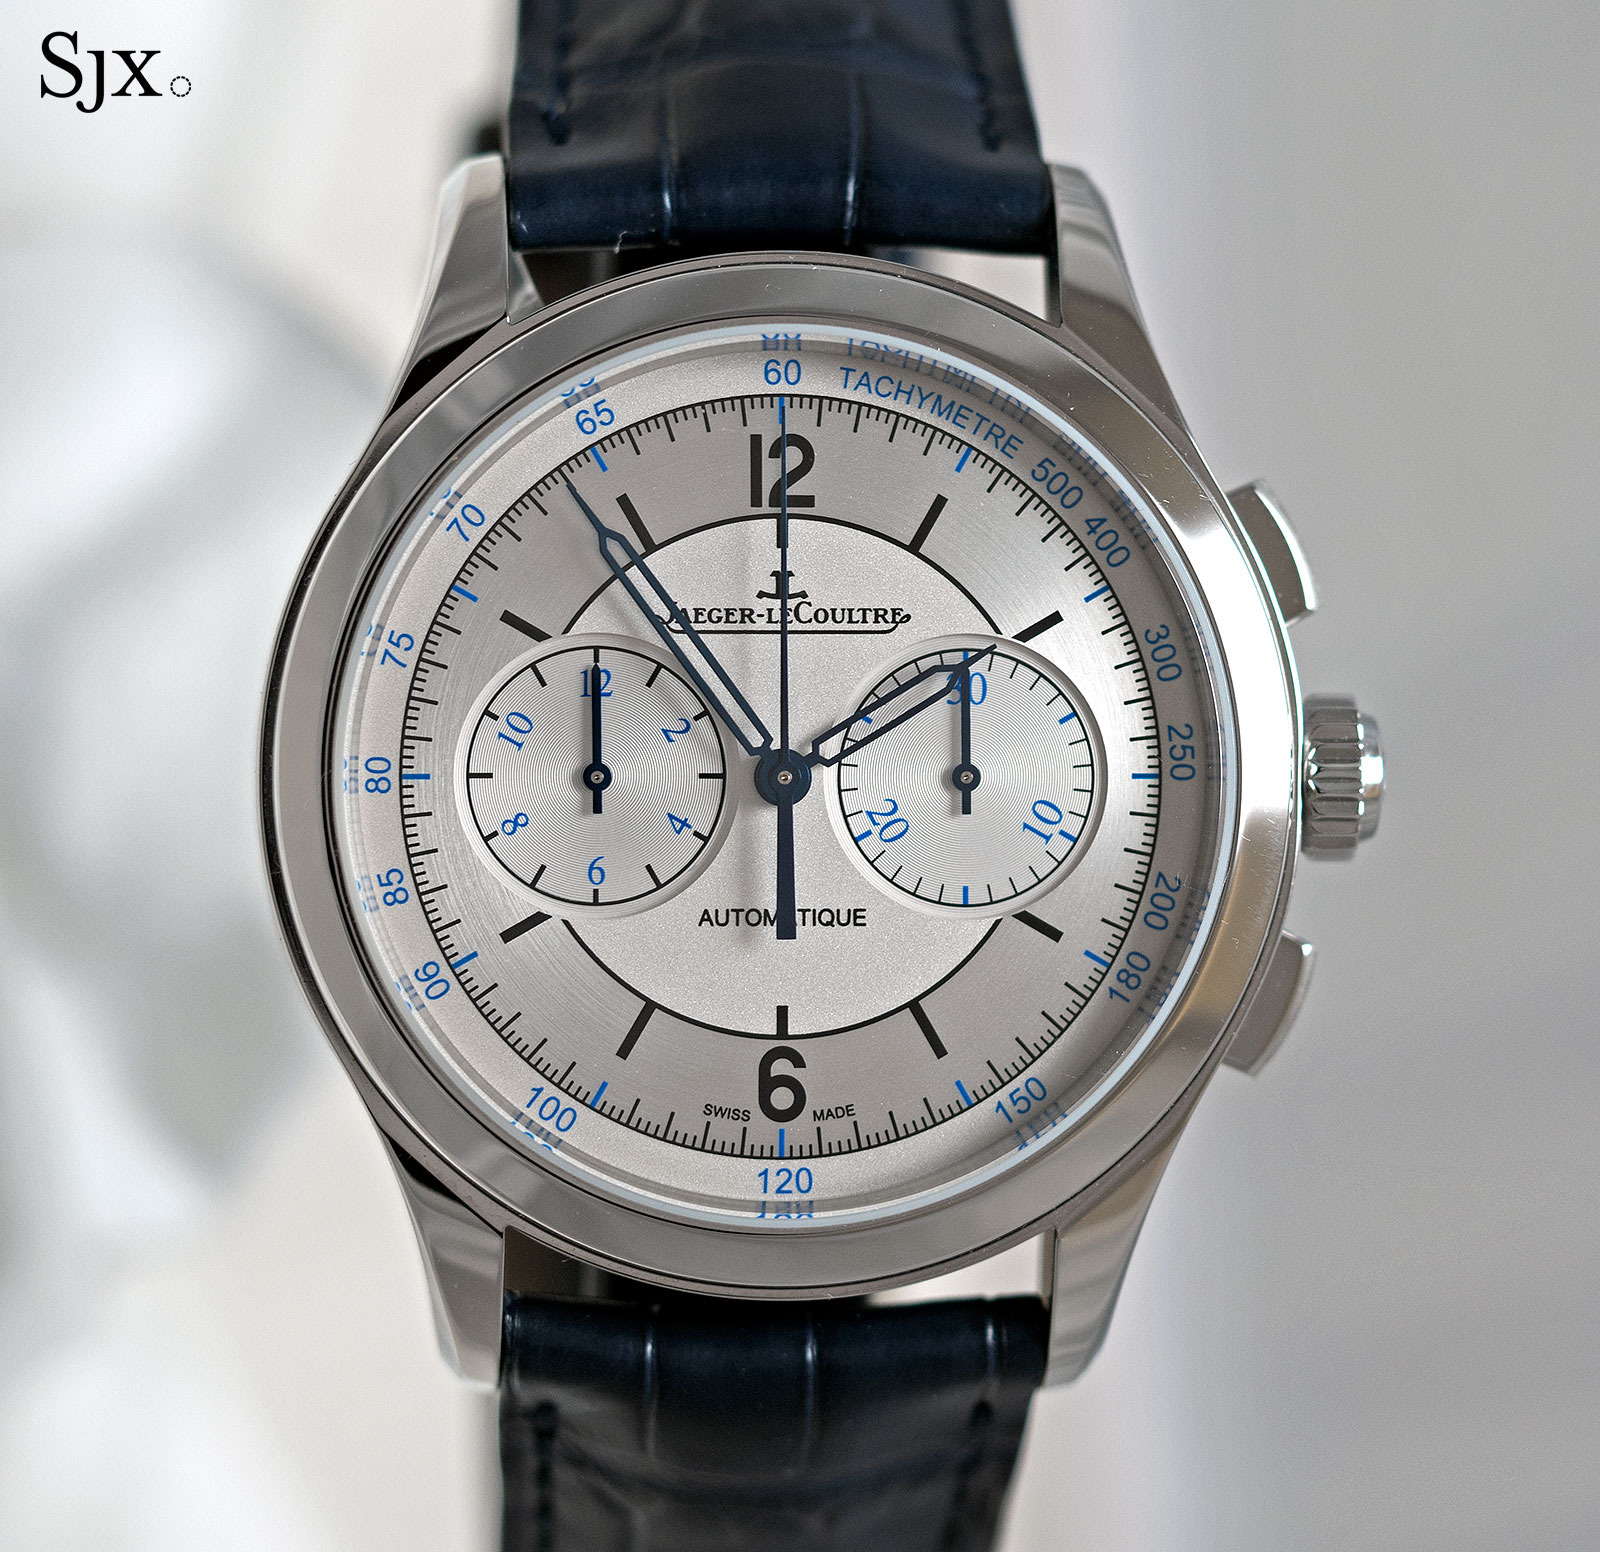 Jaeger-LeCoultre Master Control Chronograph sector dial 6